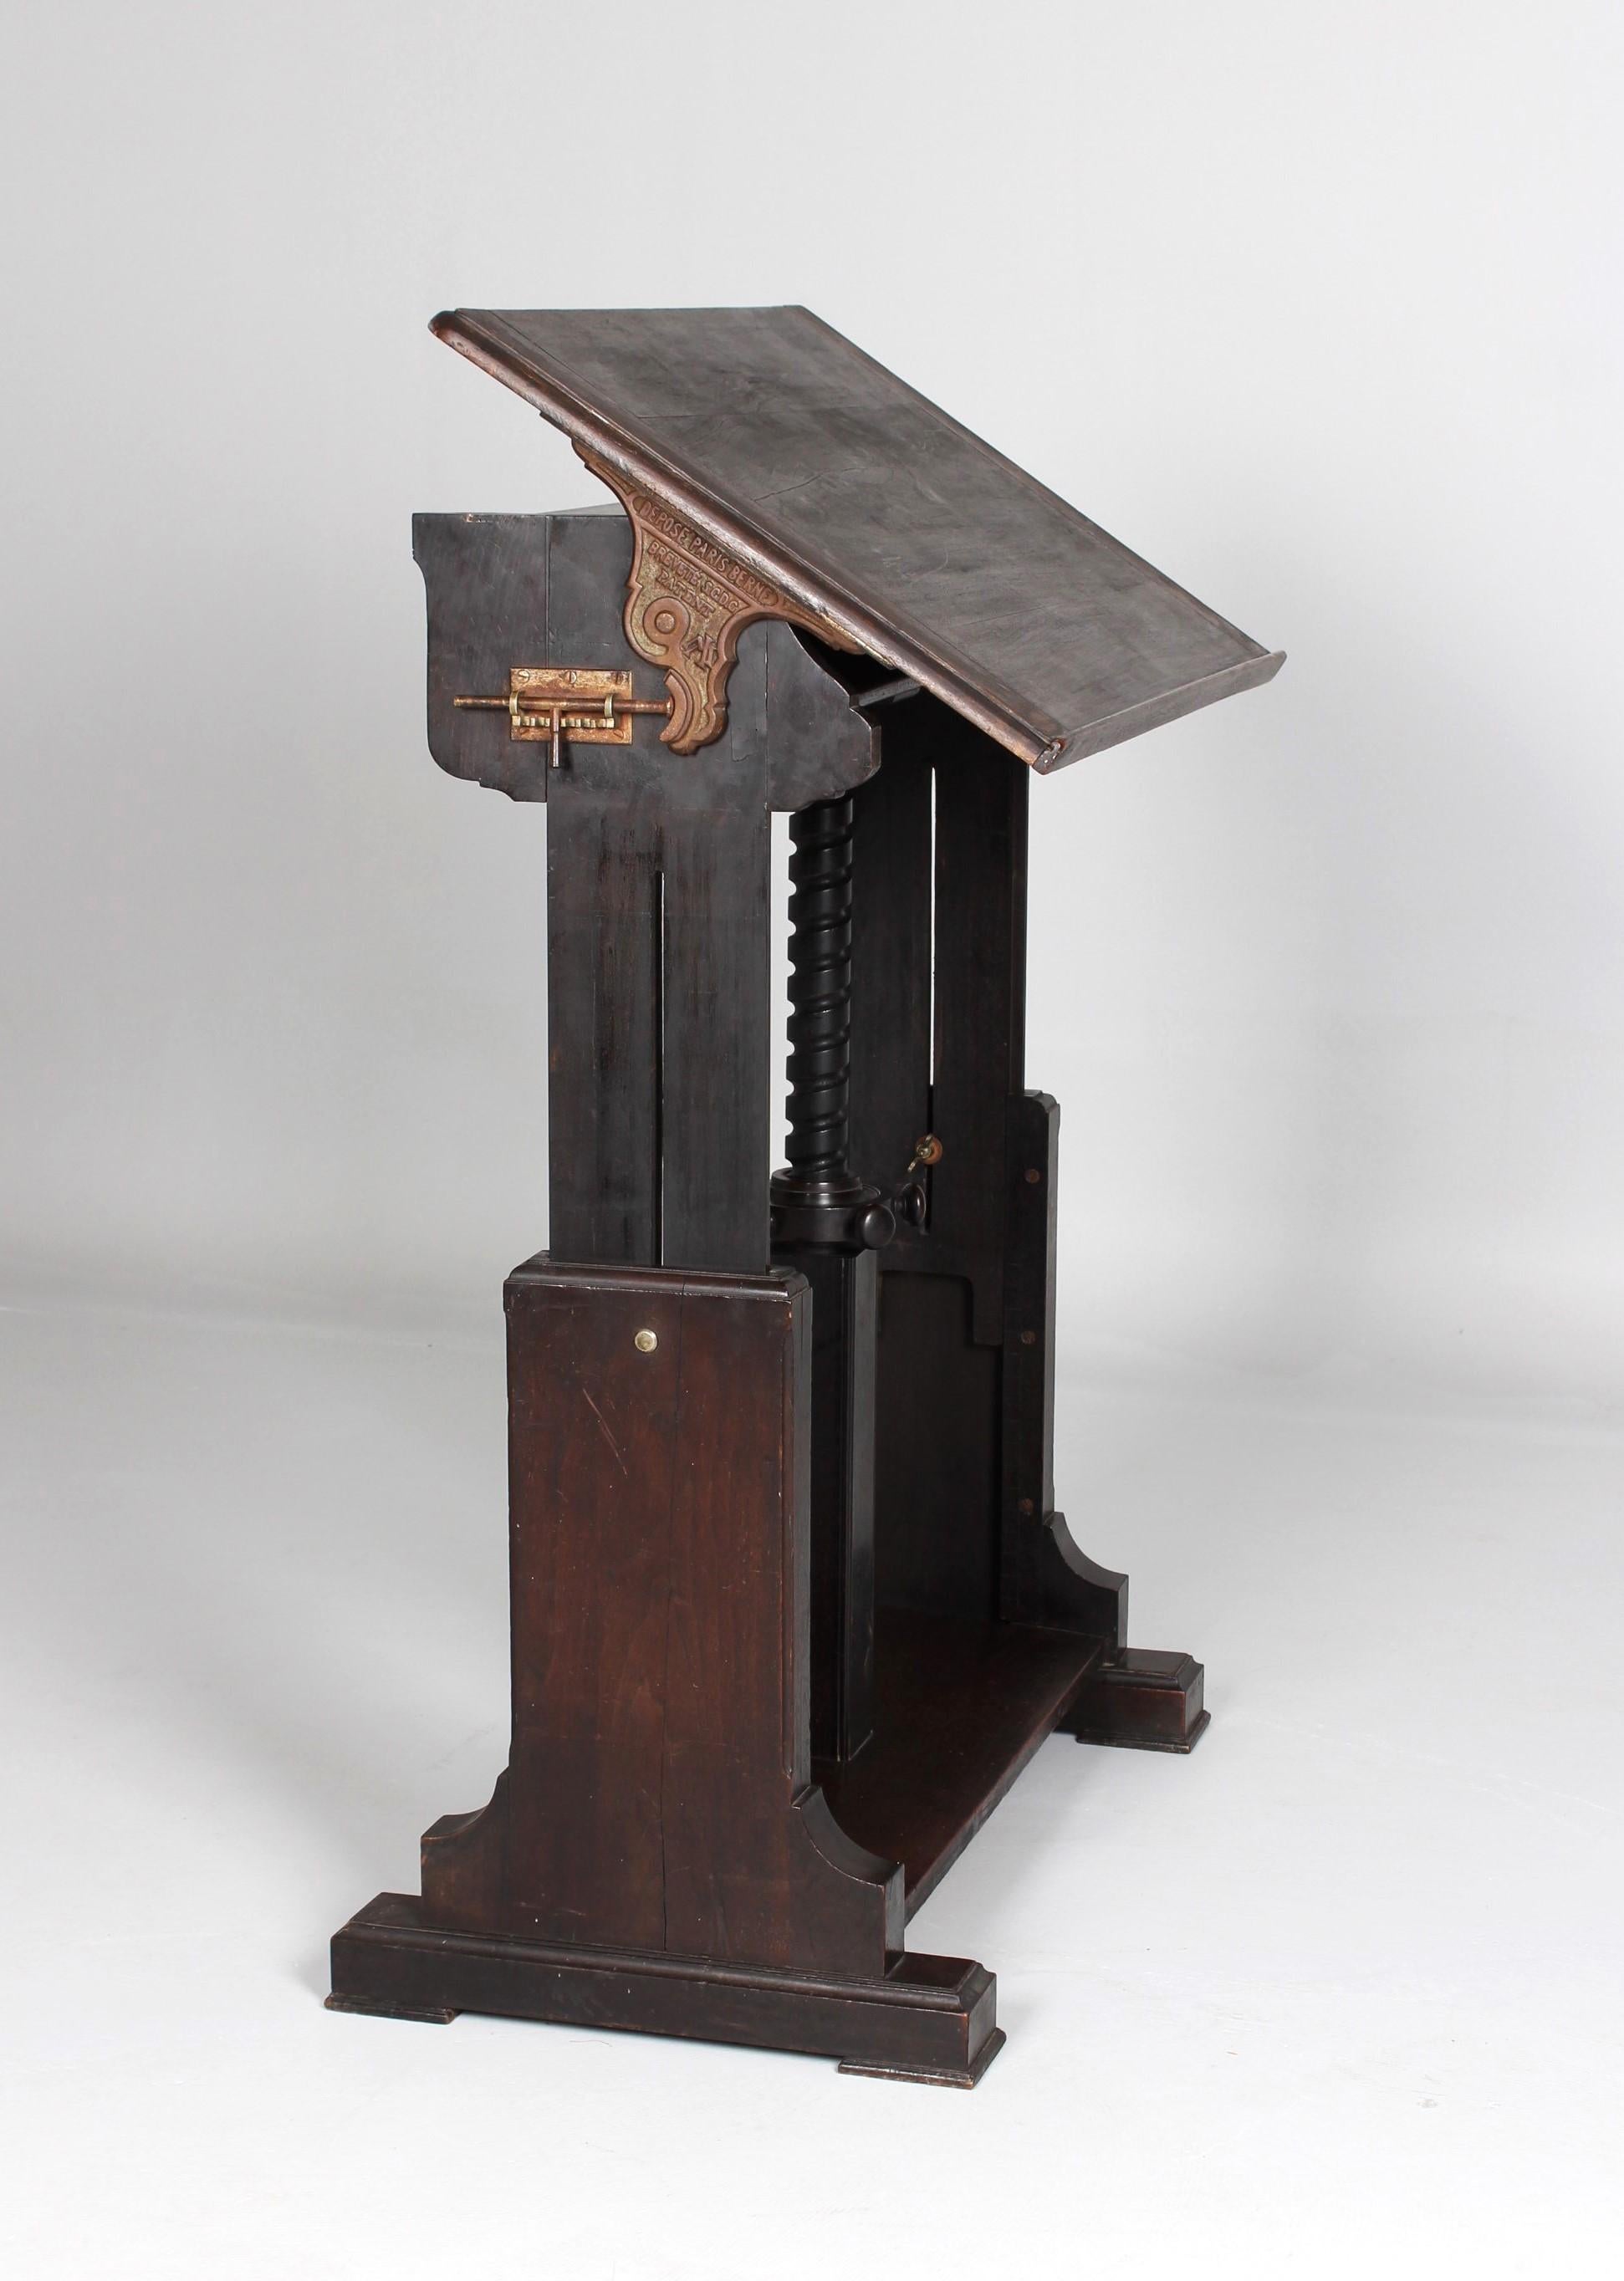 Height-adjustable writing or lectern

Switzerland
Walnut
Art Nouveau around 1910

Dimensions: height from 80 - 120 cm, work surface: 89 x 53 cm

Description:
Height-adjustable piece of furniture that may have served as a writing and drawing table or